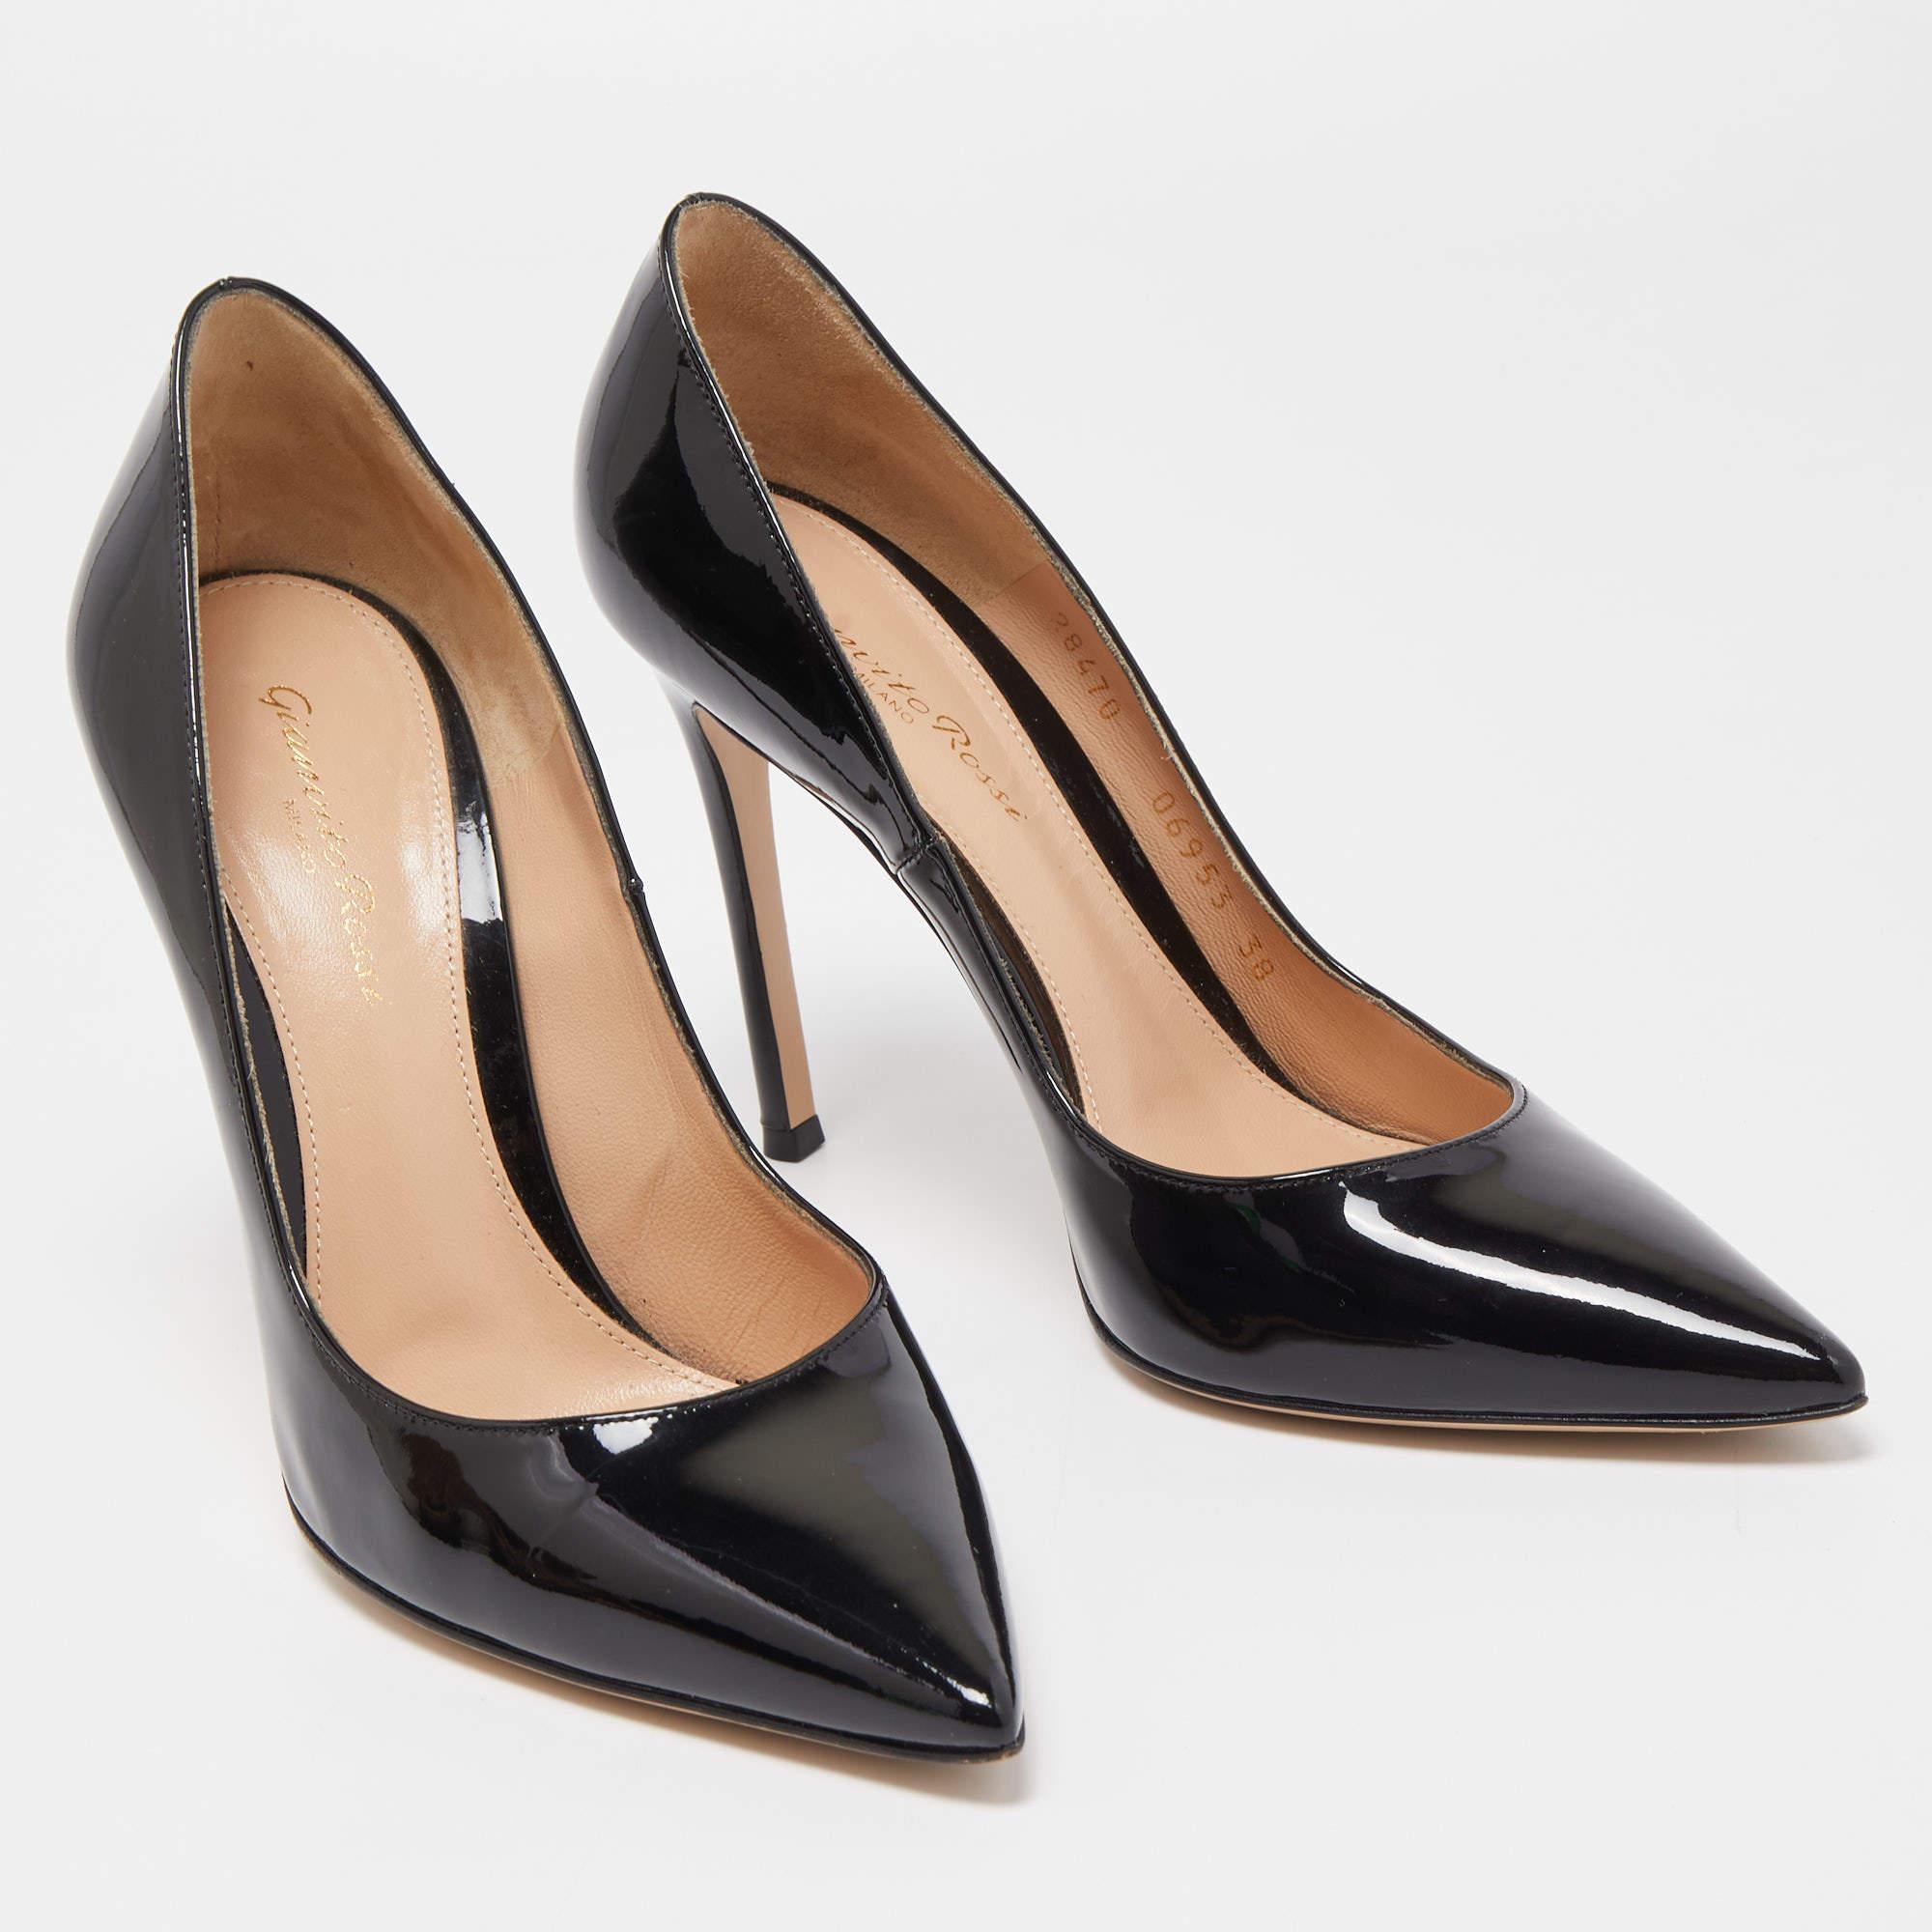 Gianvito Rossi Black Patent Leather Pointed Toe Pumps Size 38 1